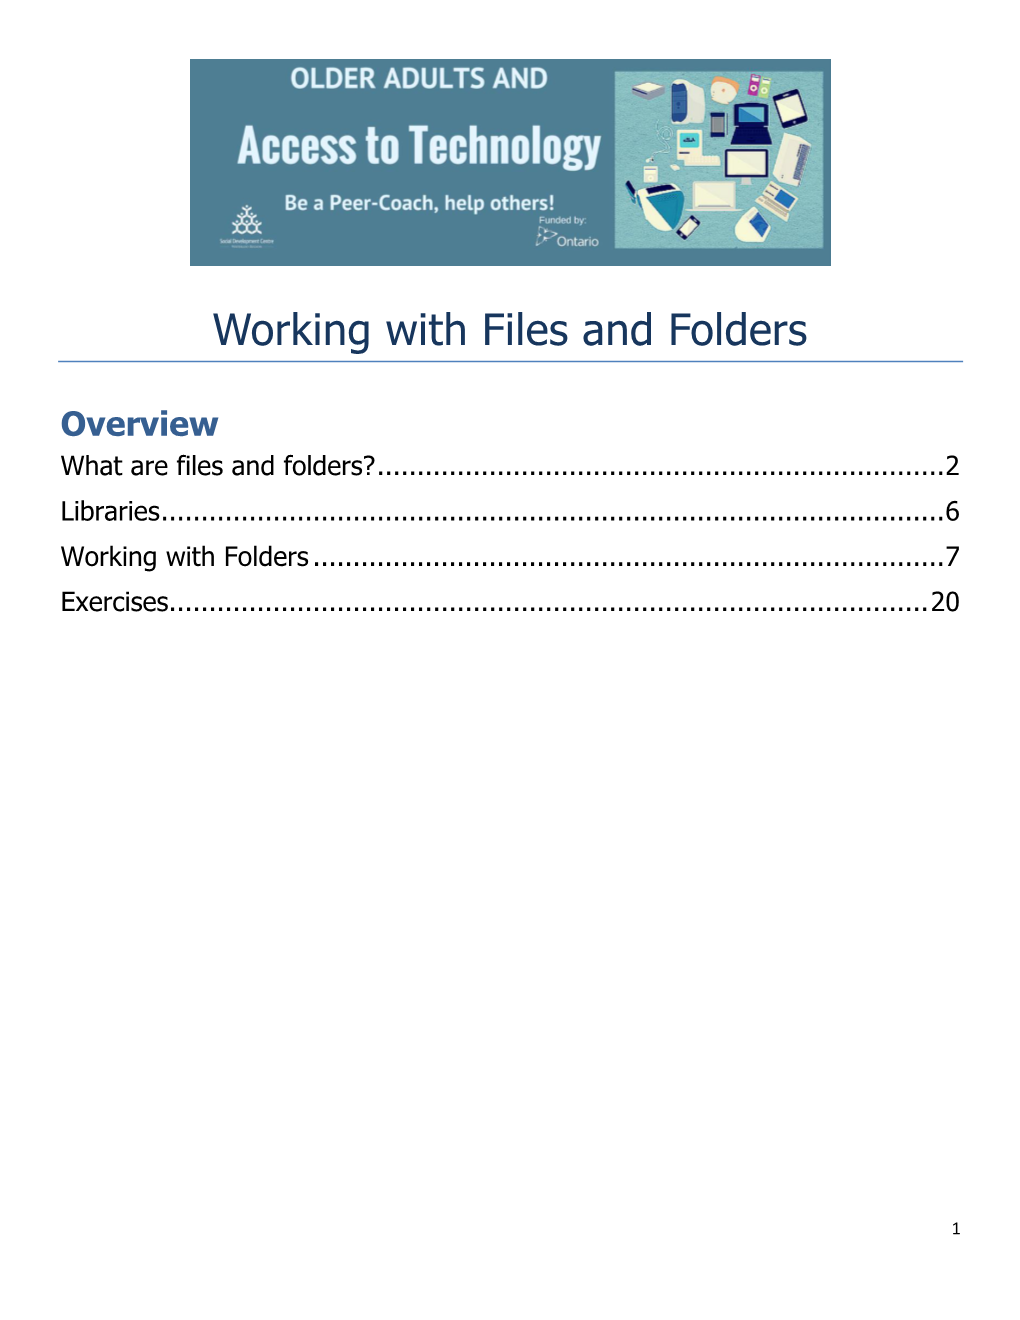 Working with Files and Folders